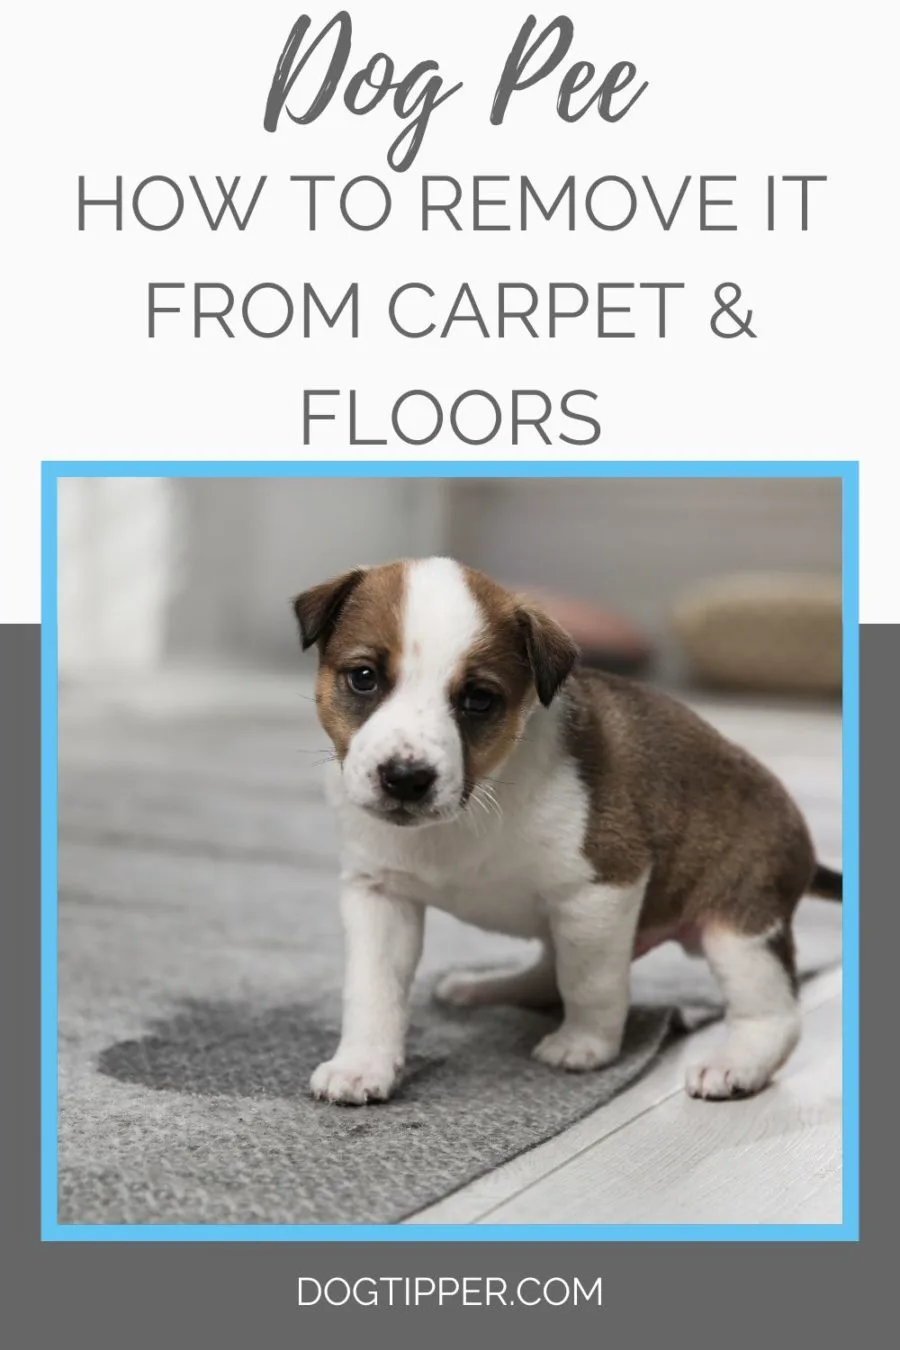 Dog Pee: How to remove it from carpet and floors